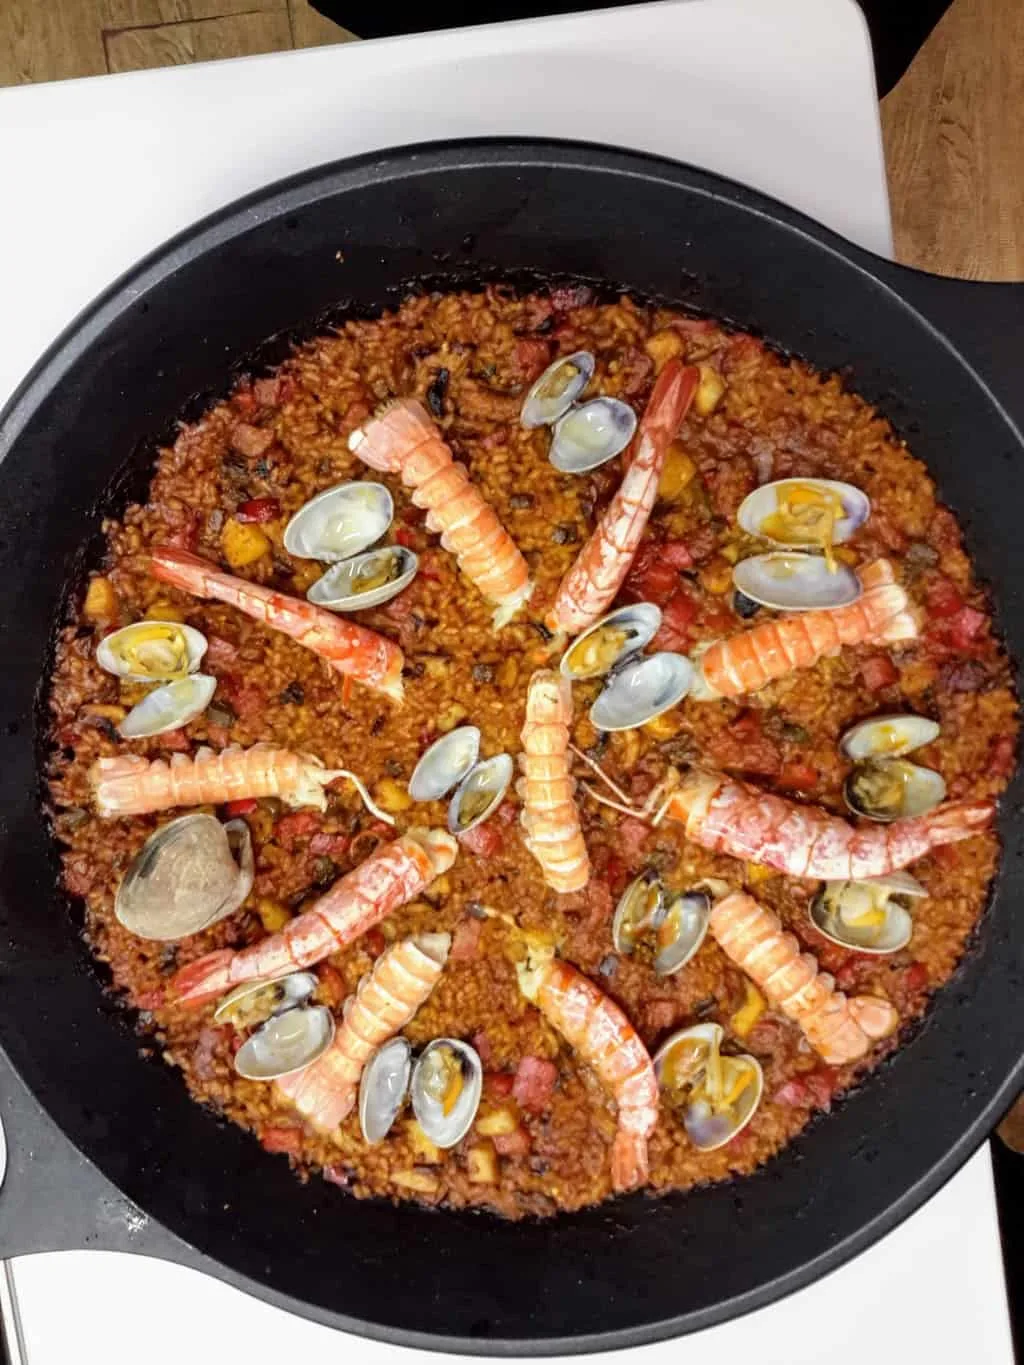 A castiron skillet full of the authentic, seafood paella that you'll make during your Catalan cooking class with BCN Kitchen. 